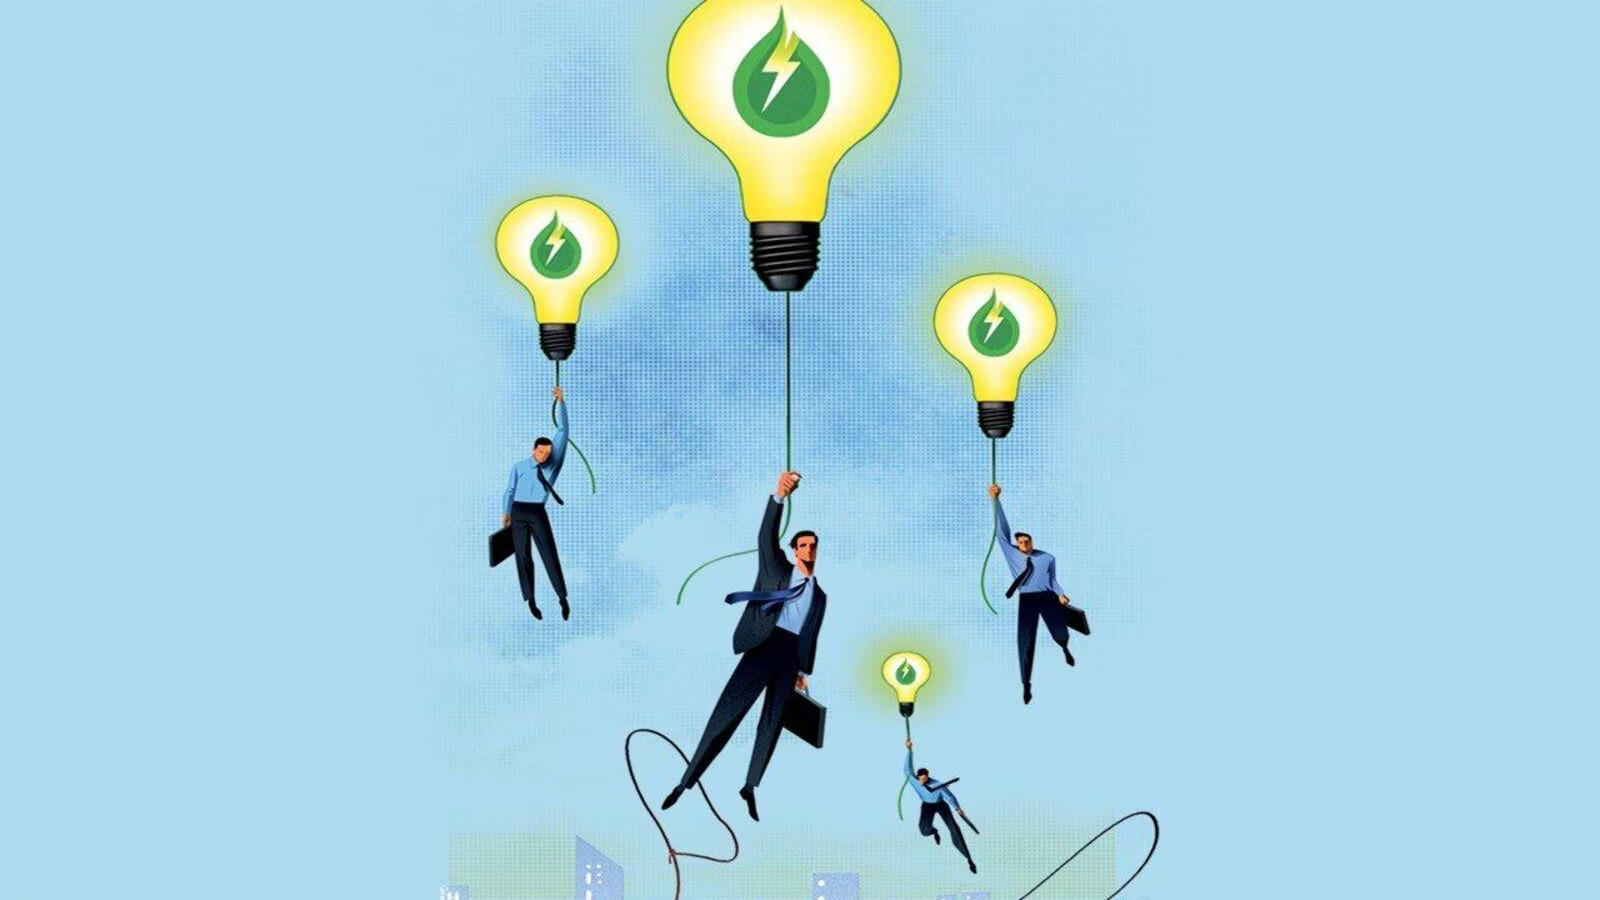 India Inc Looking to Recruit Talent with ‘Green’ Skills